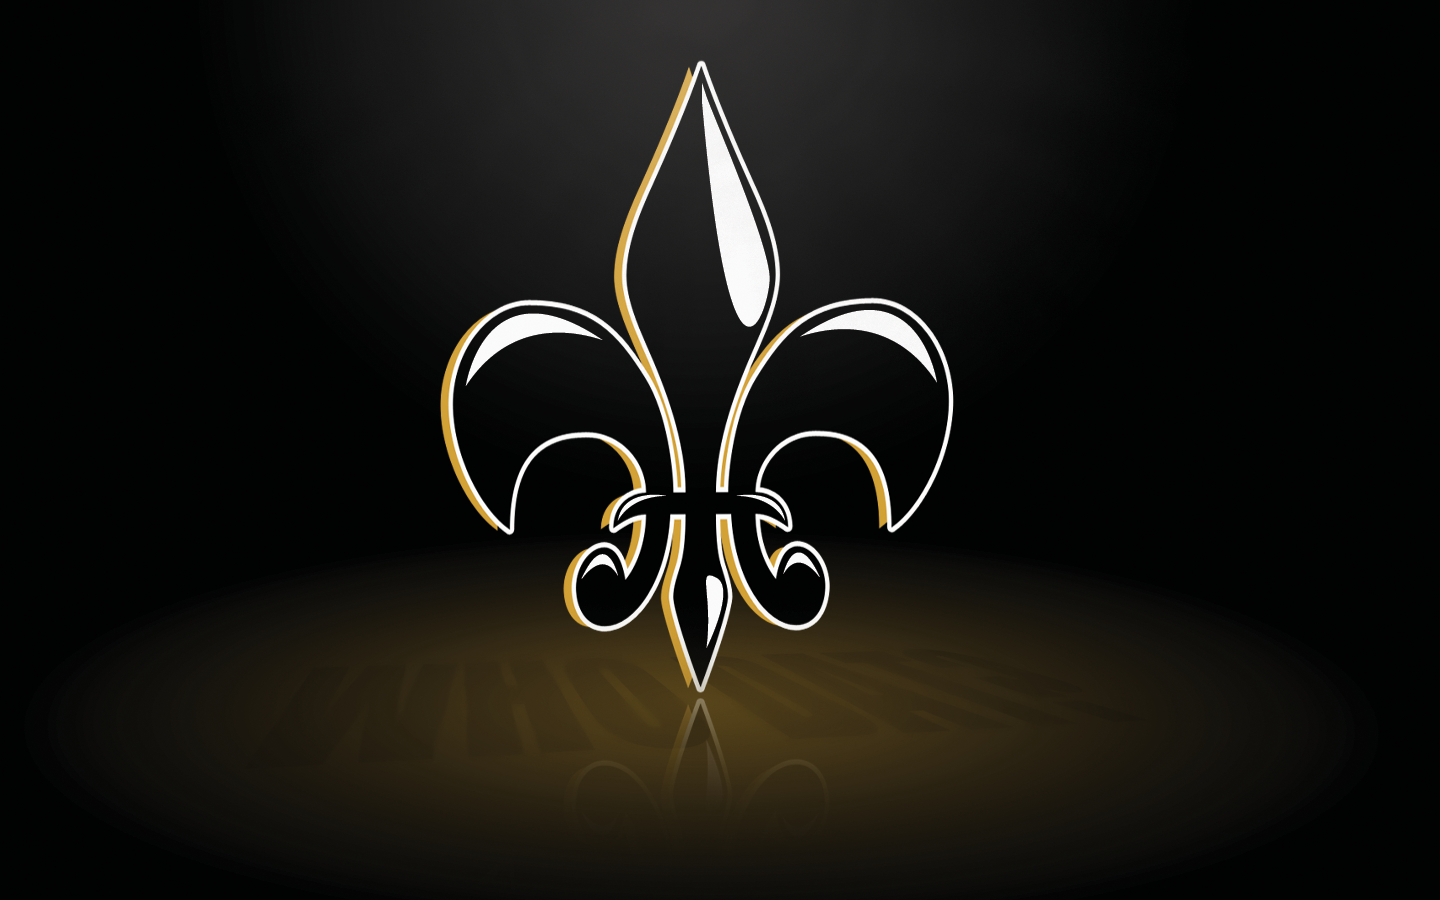 Check This Out Our New Orleans Saints Wallpaper By